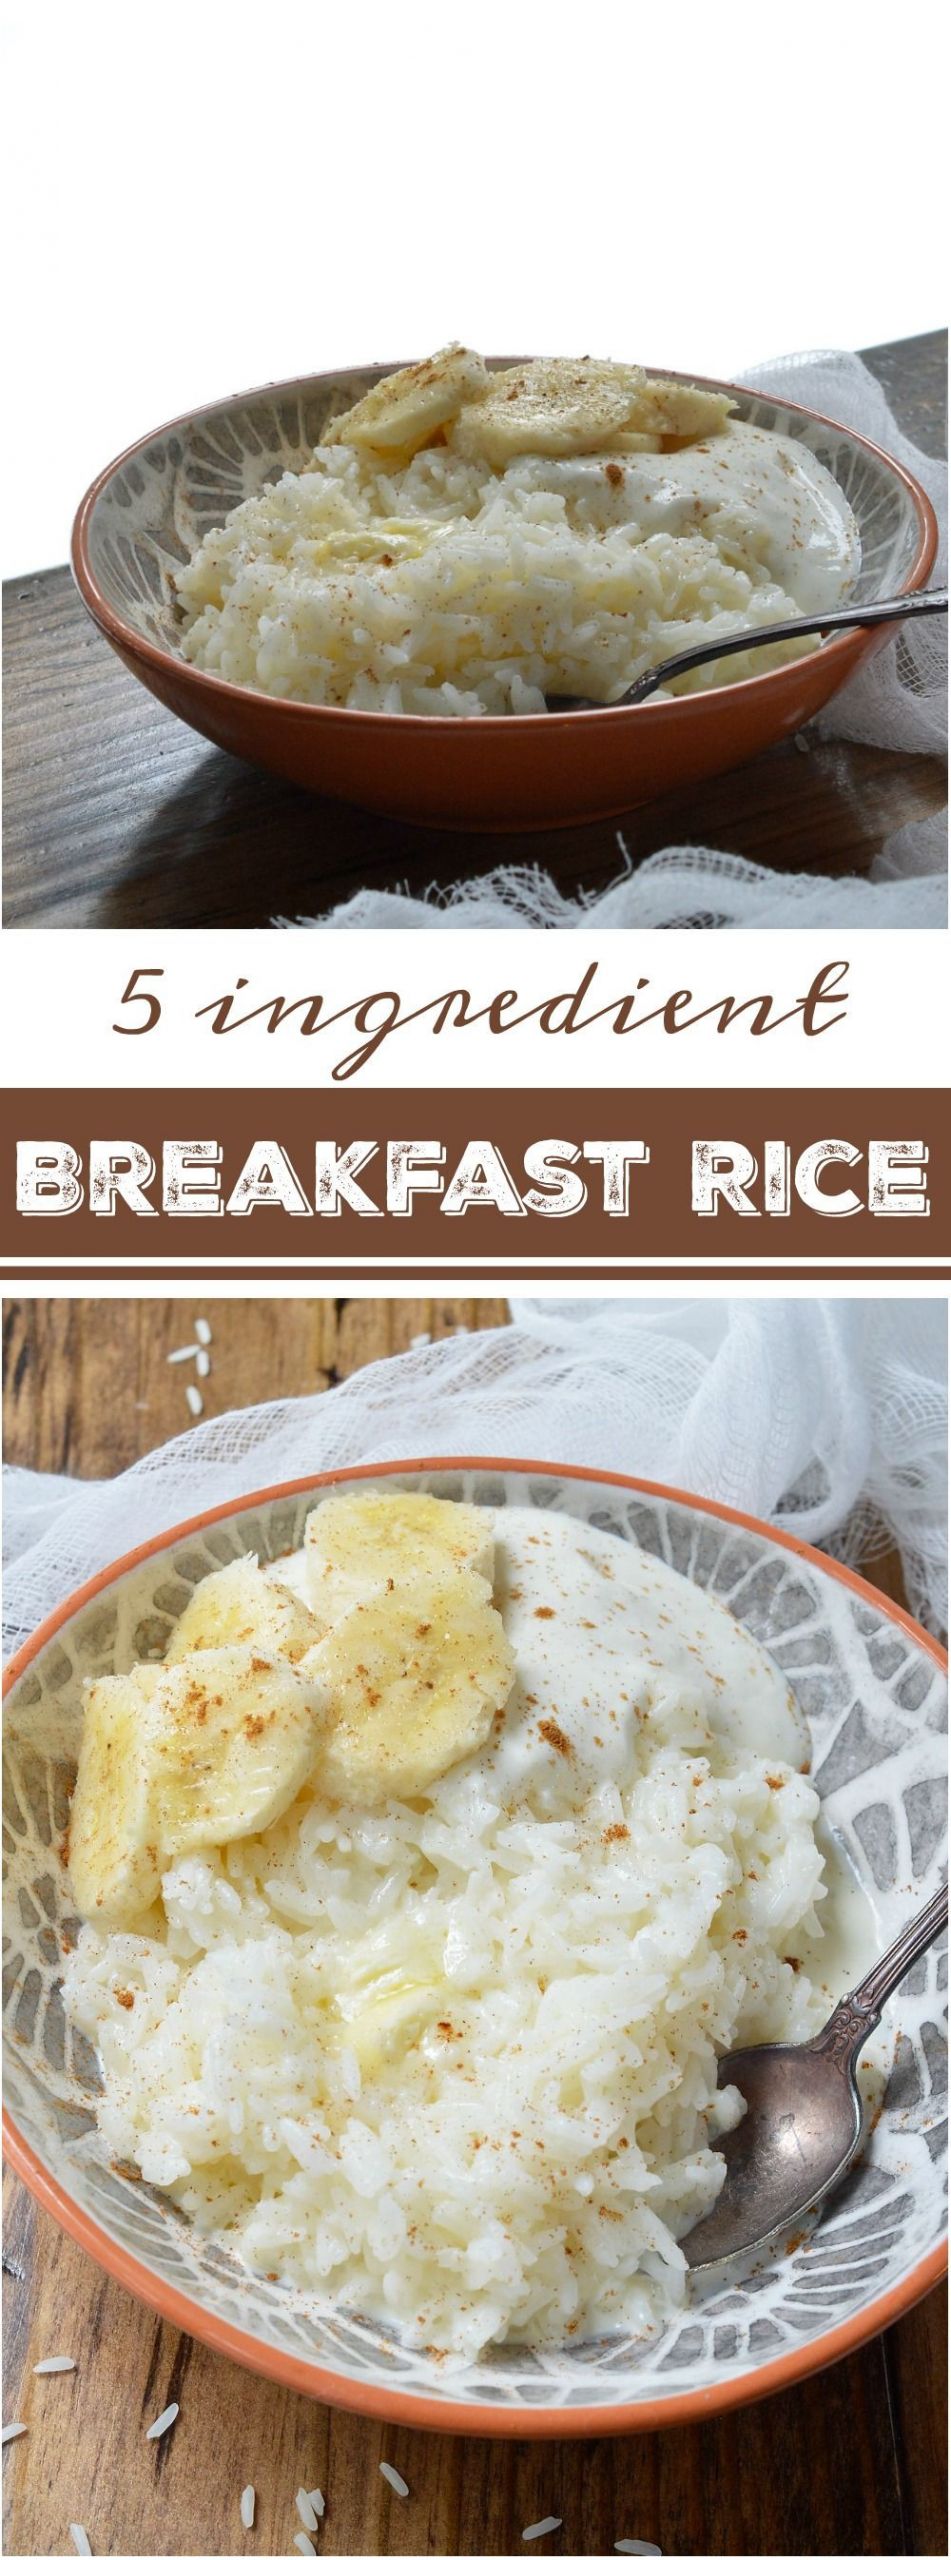 Rice Breakfast Recipes
 This 5 Ingre nt Breakfast Rice Recipe is a dish from my